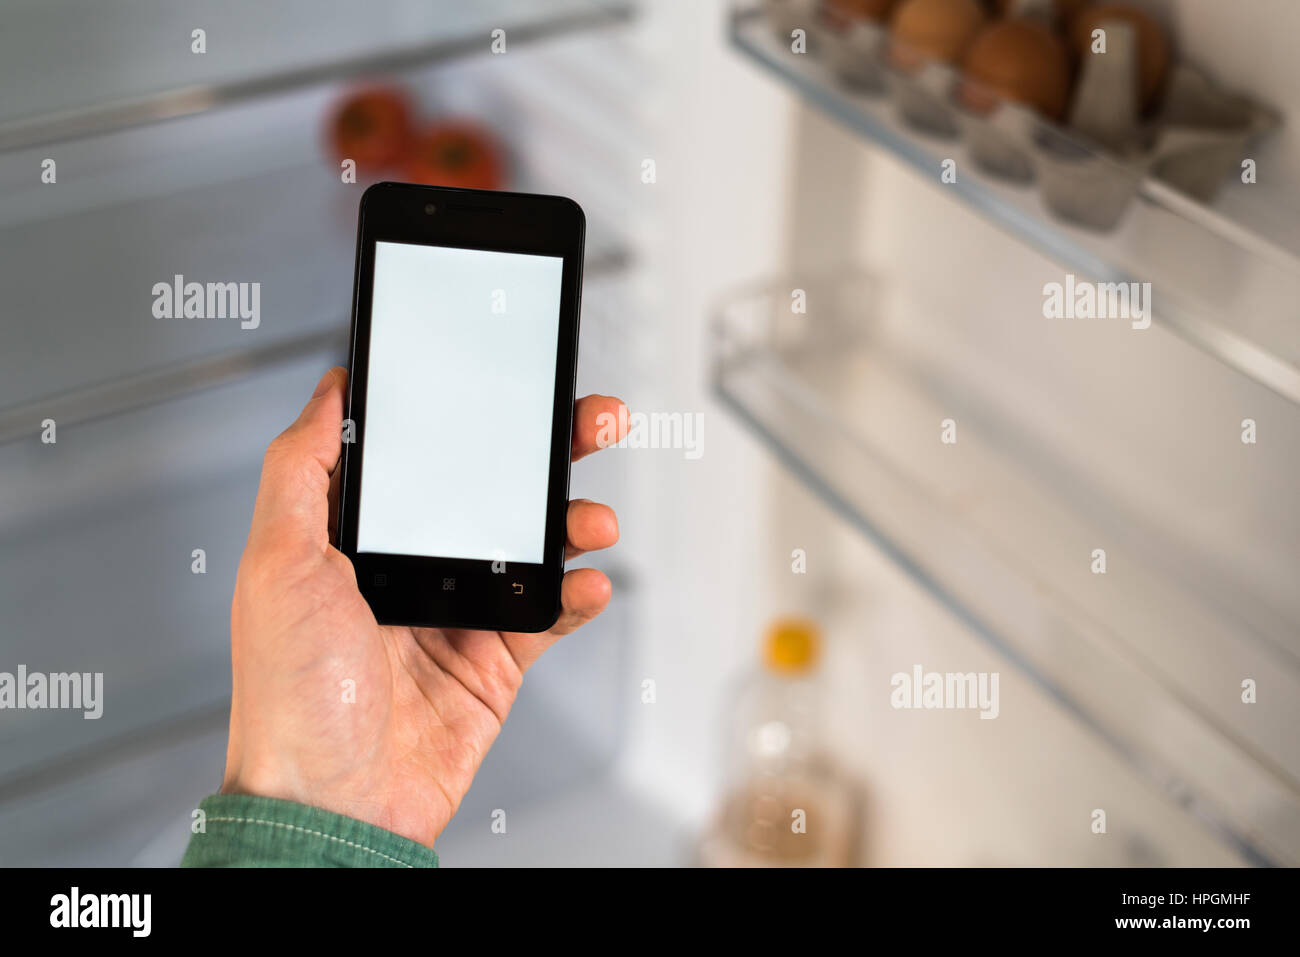 Close-up of person hands holding smartphone showing white screen on display. Empty Refrigerator on background Stock Photo